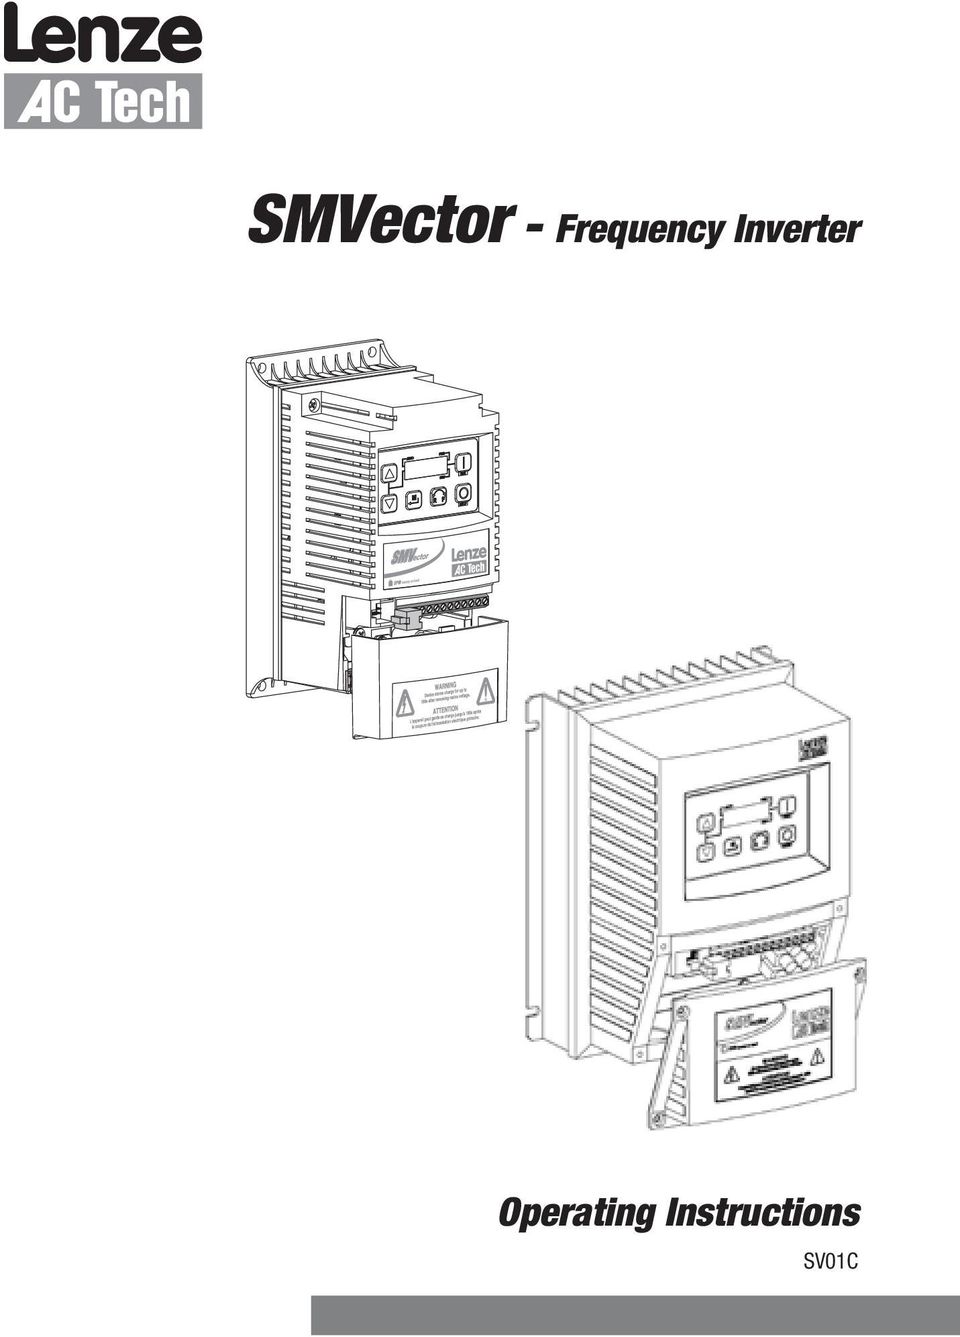 Smvector - Frequency Inverter - Pdf Free Download